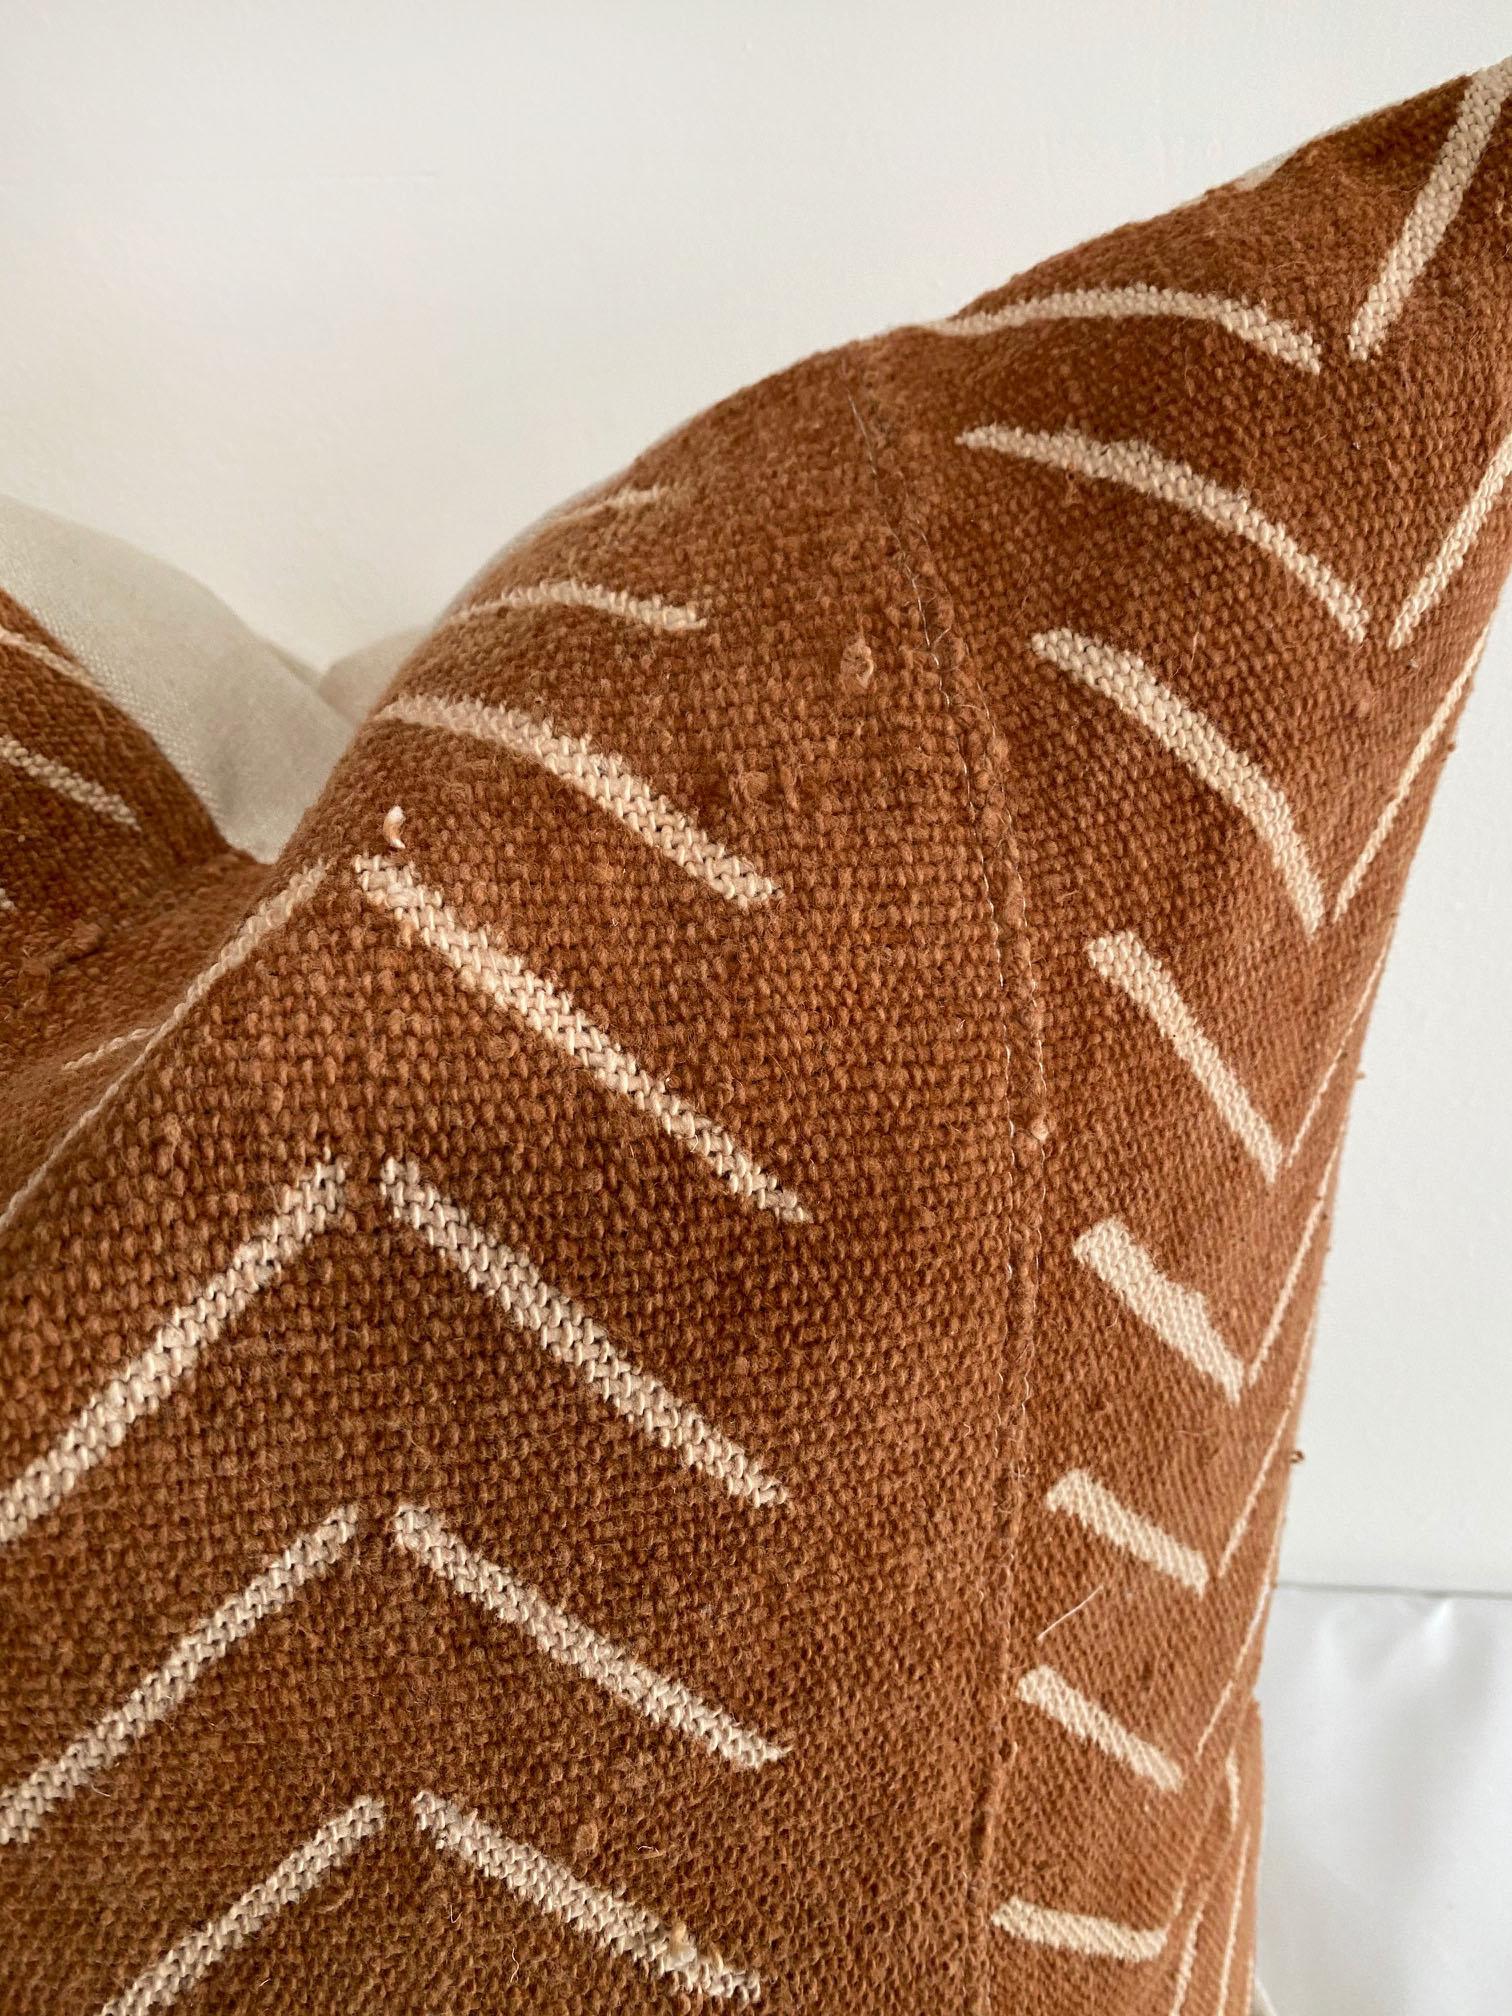 Vintage African Mudcloth pillows, deep burnt orange rust color, with off white arrow pattern. Sewn with a zipper closure, and natural linen backing. The inside has an overlocked edge, can be machine washed on gentle. For color fading dry clean is